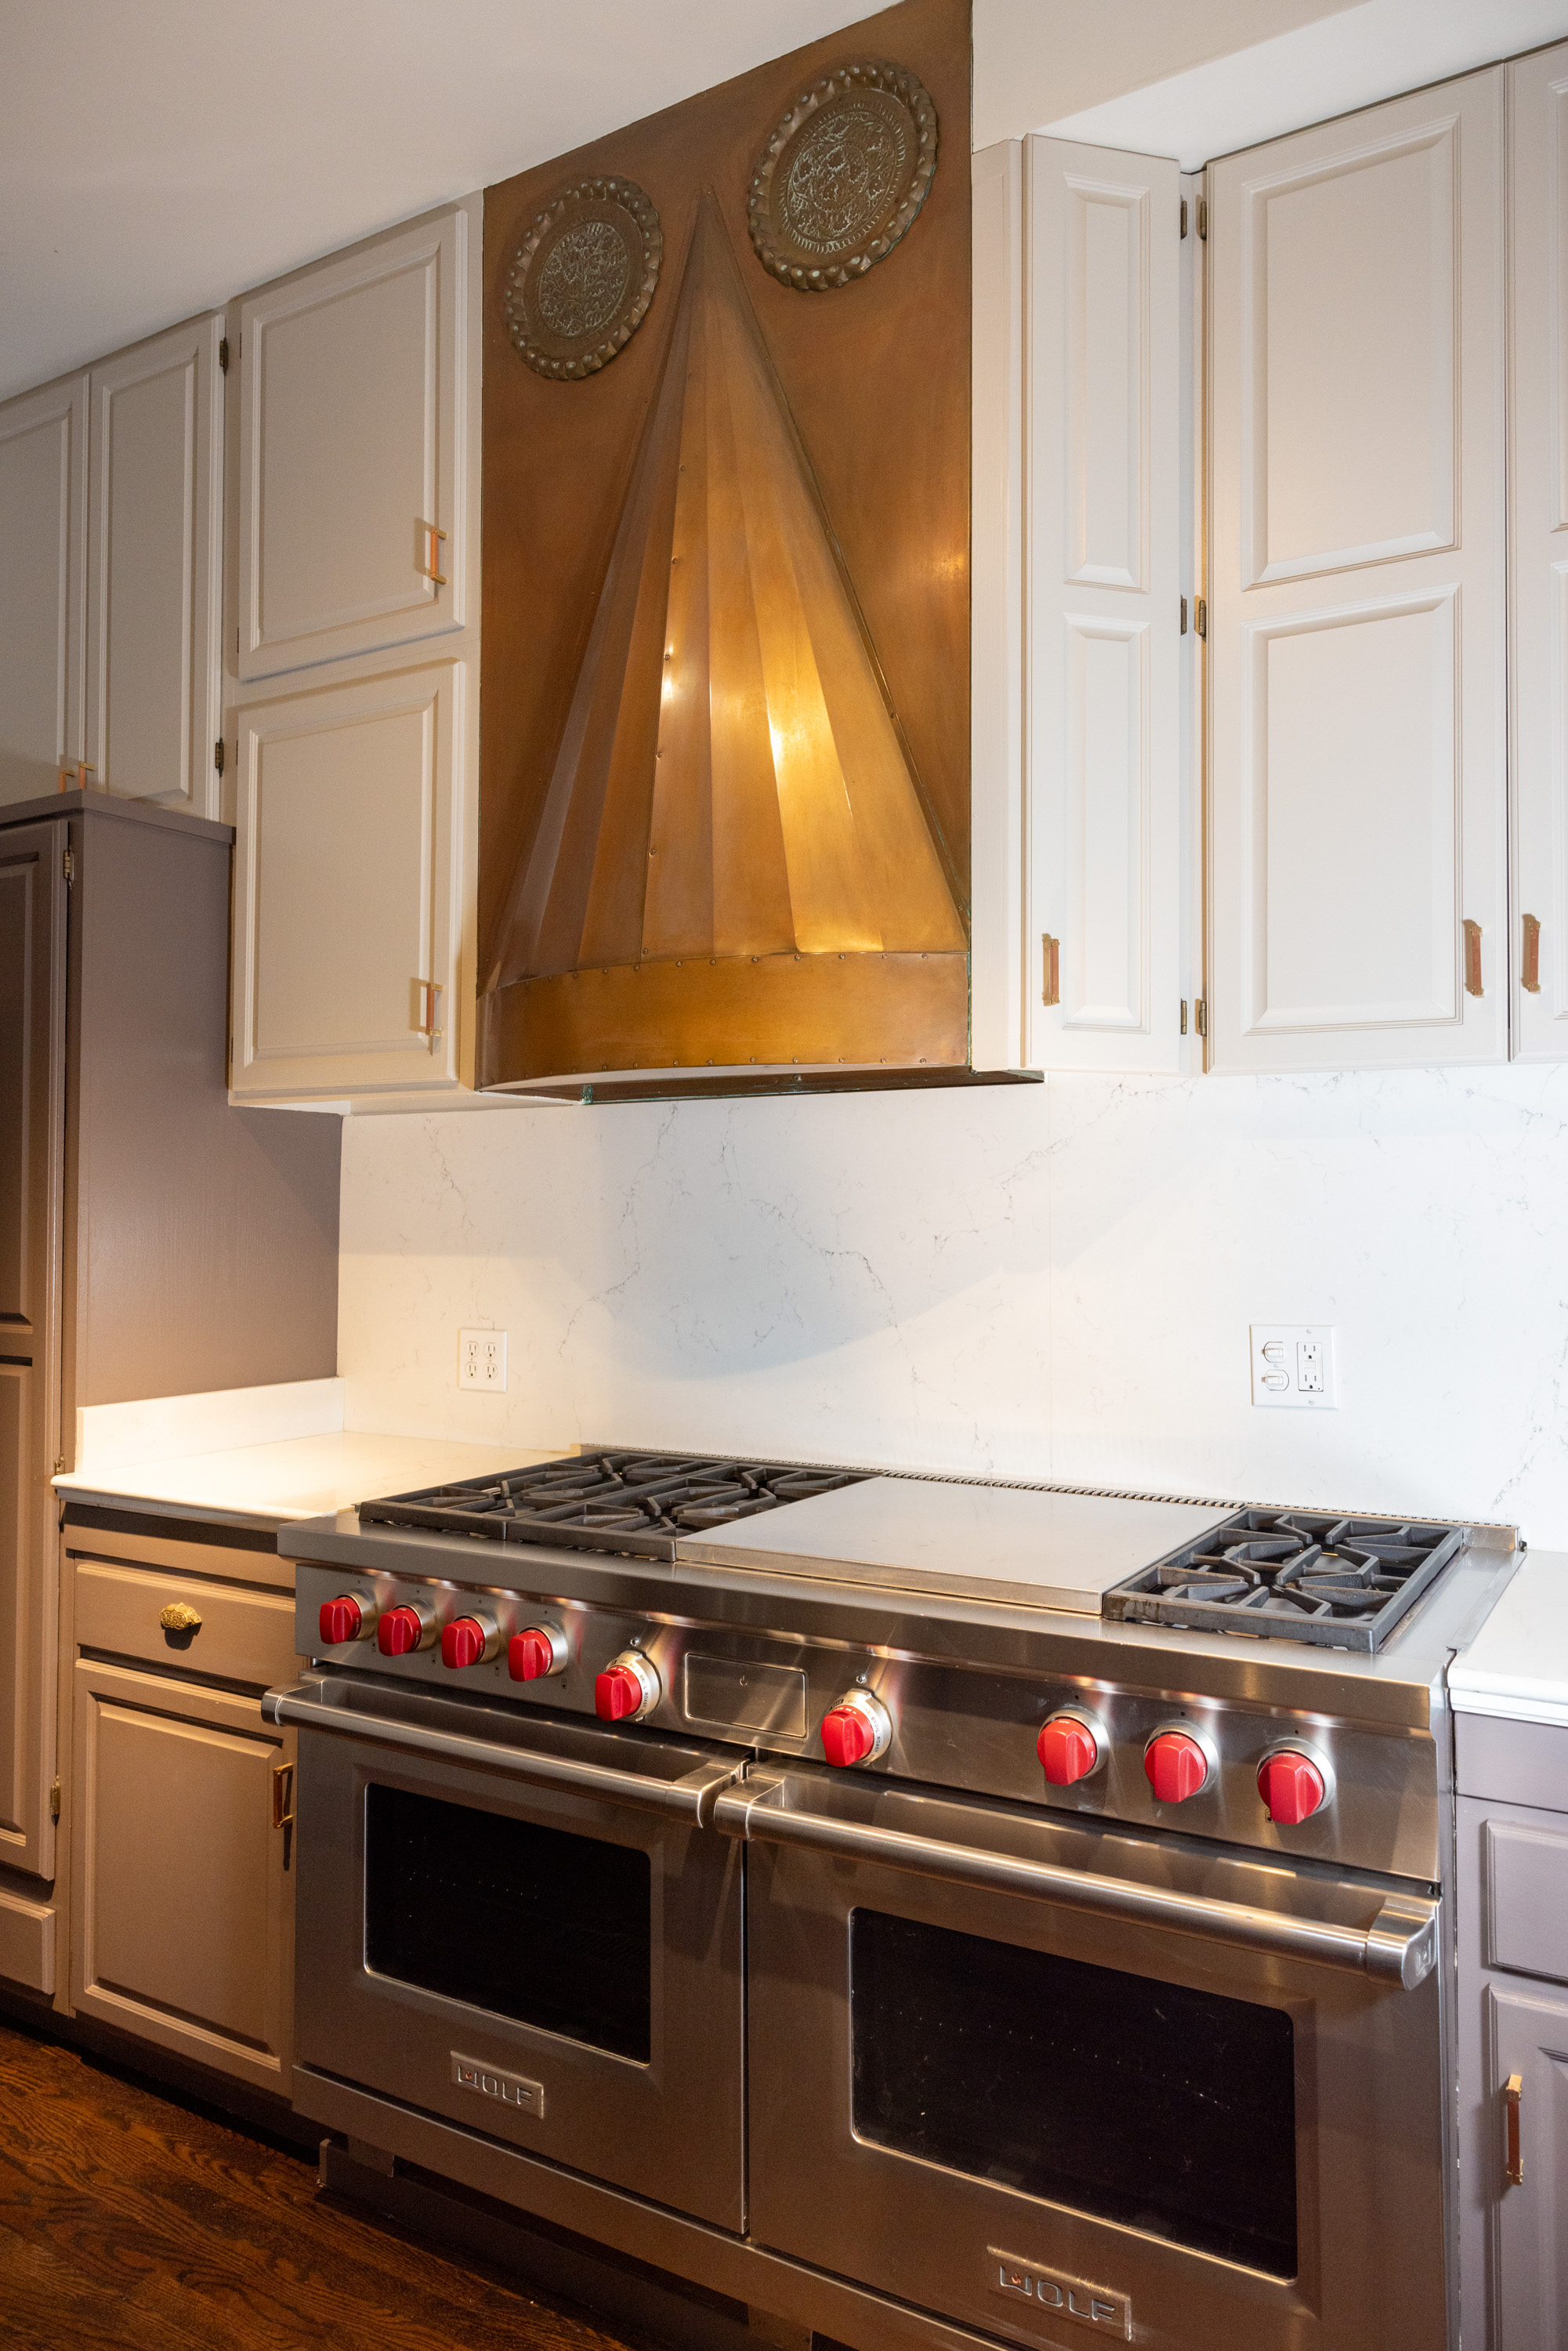 The image shows a modern kitchen with a stainless steel stove featuring six red knobs and dual ovens. Above, there's a unique copper range hood surrounded by white cabinets.